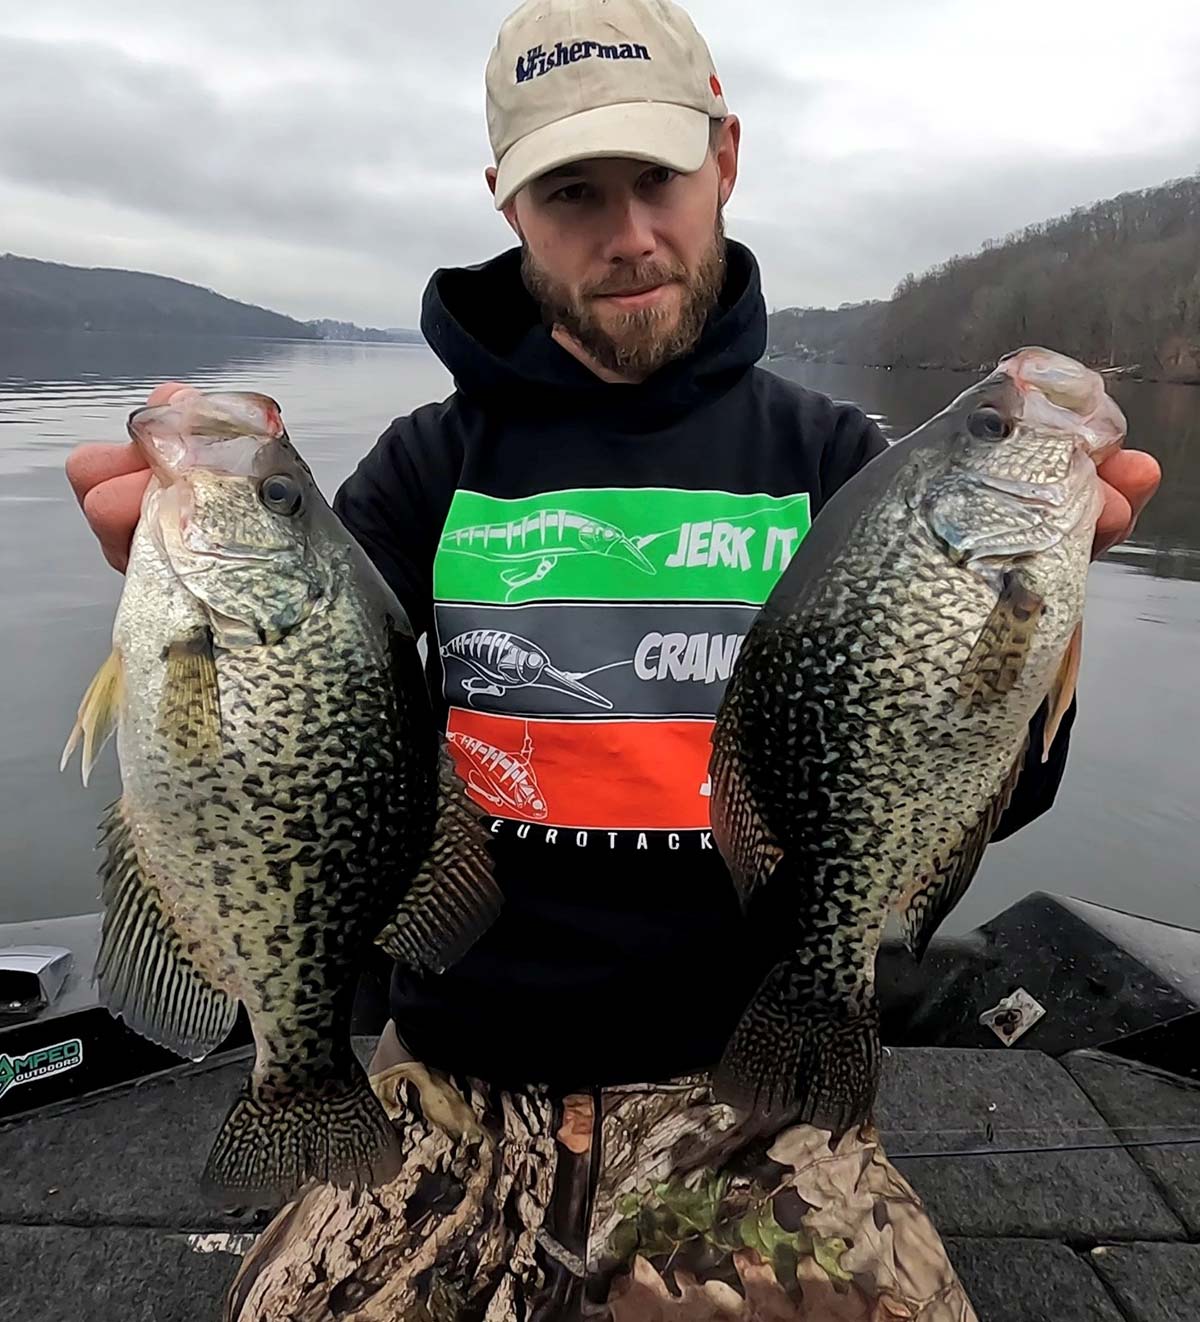 Trolling for more and bigger crappie